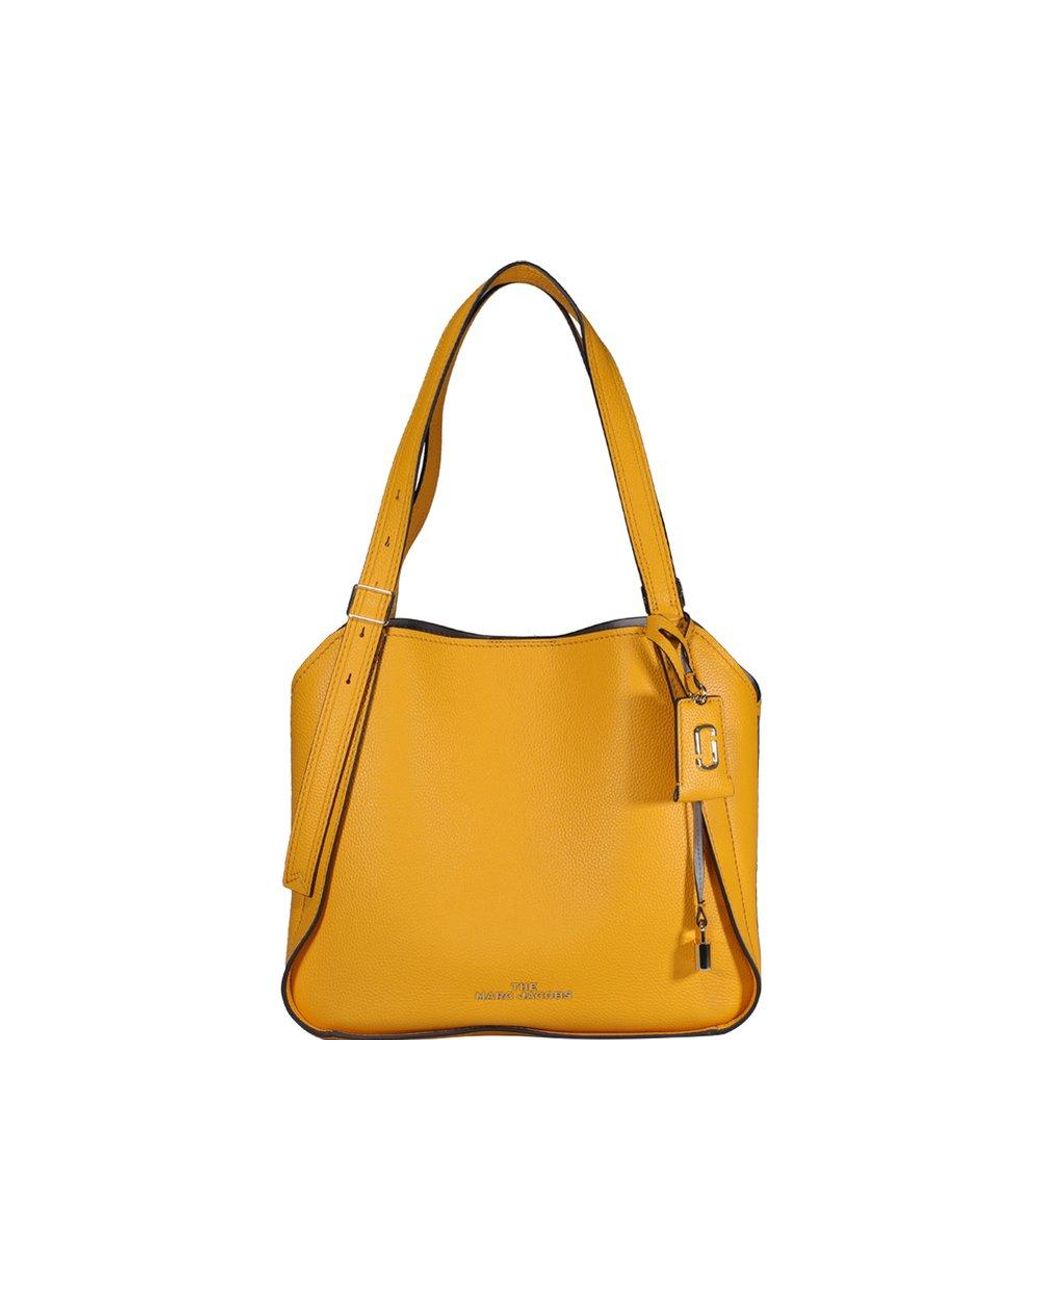 Marc Jacobs The Director Tote Bag in Yellow | Lyst